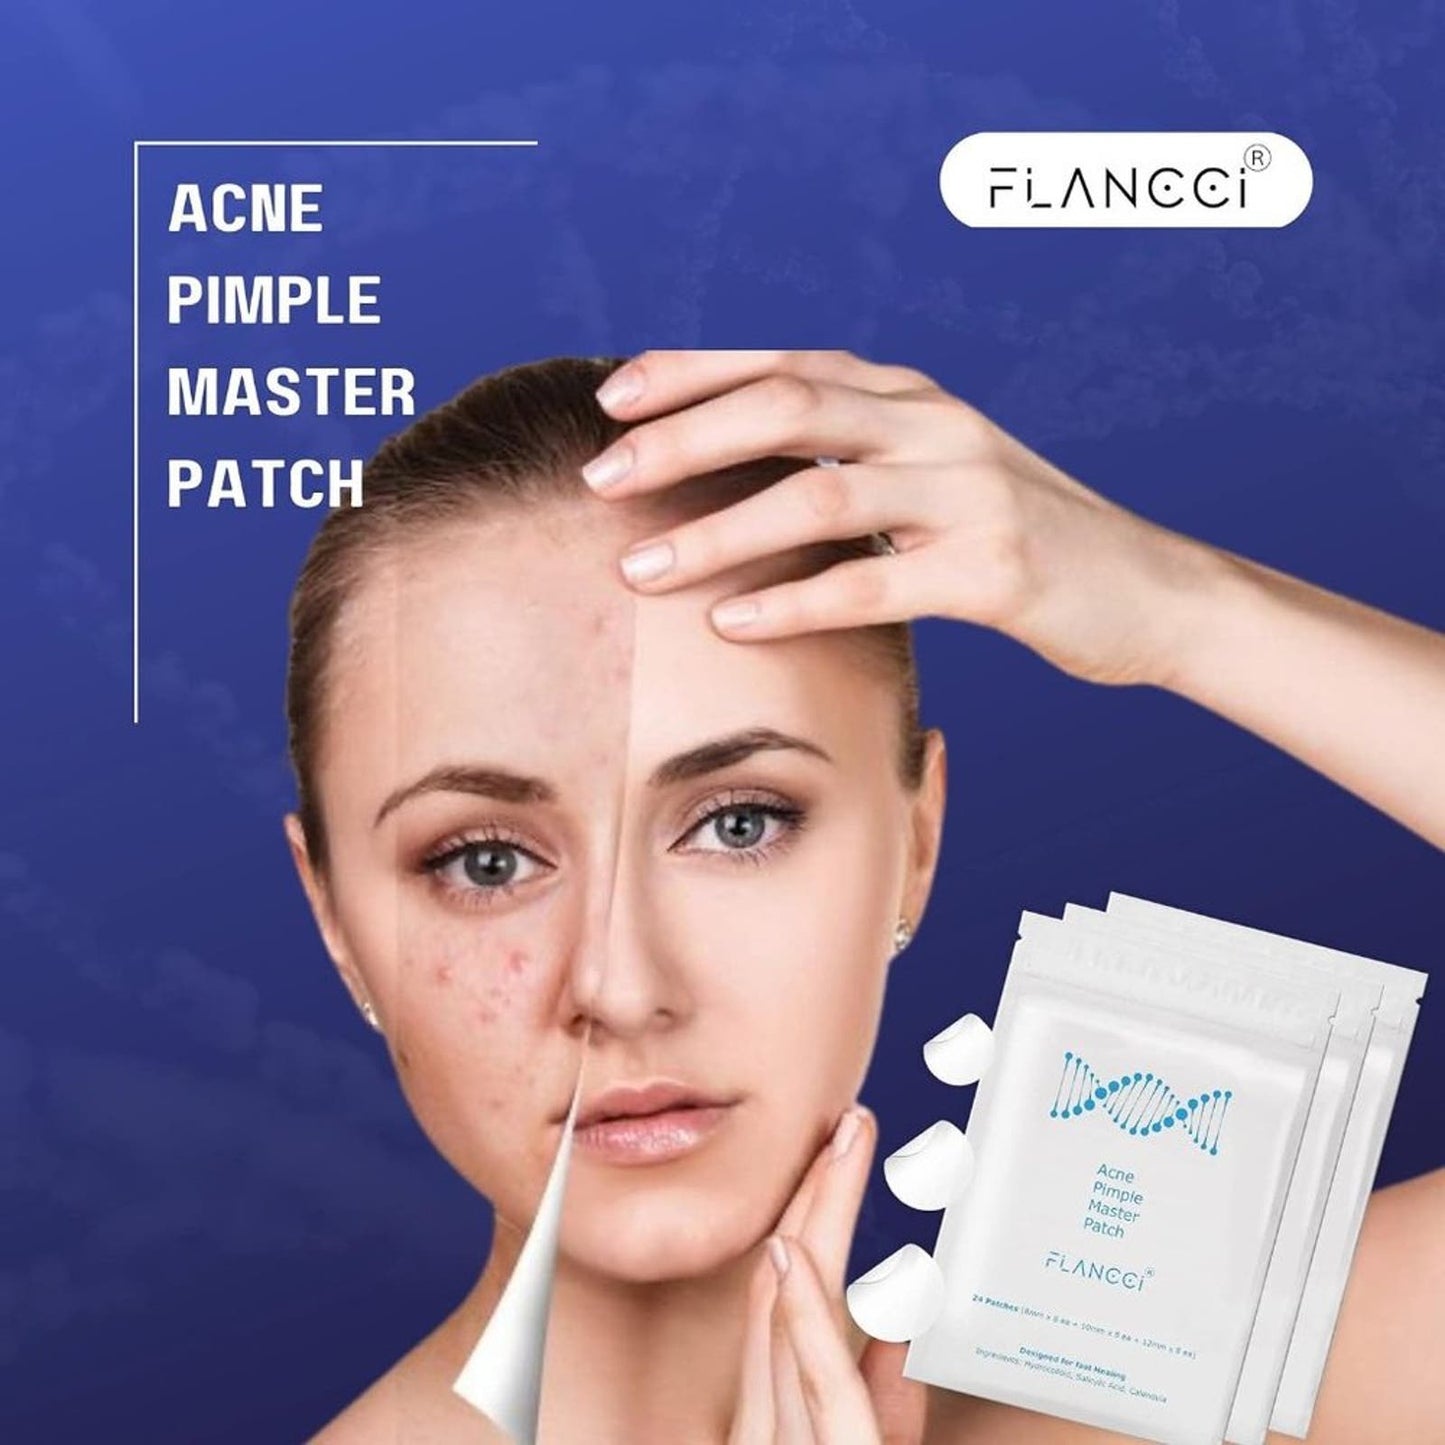 Pimple Patch Acne Patches Facial Skin Care Products, Blackhead Remover Skincare